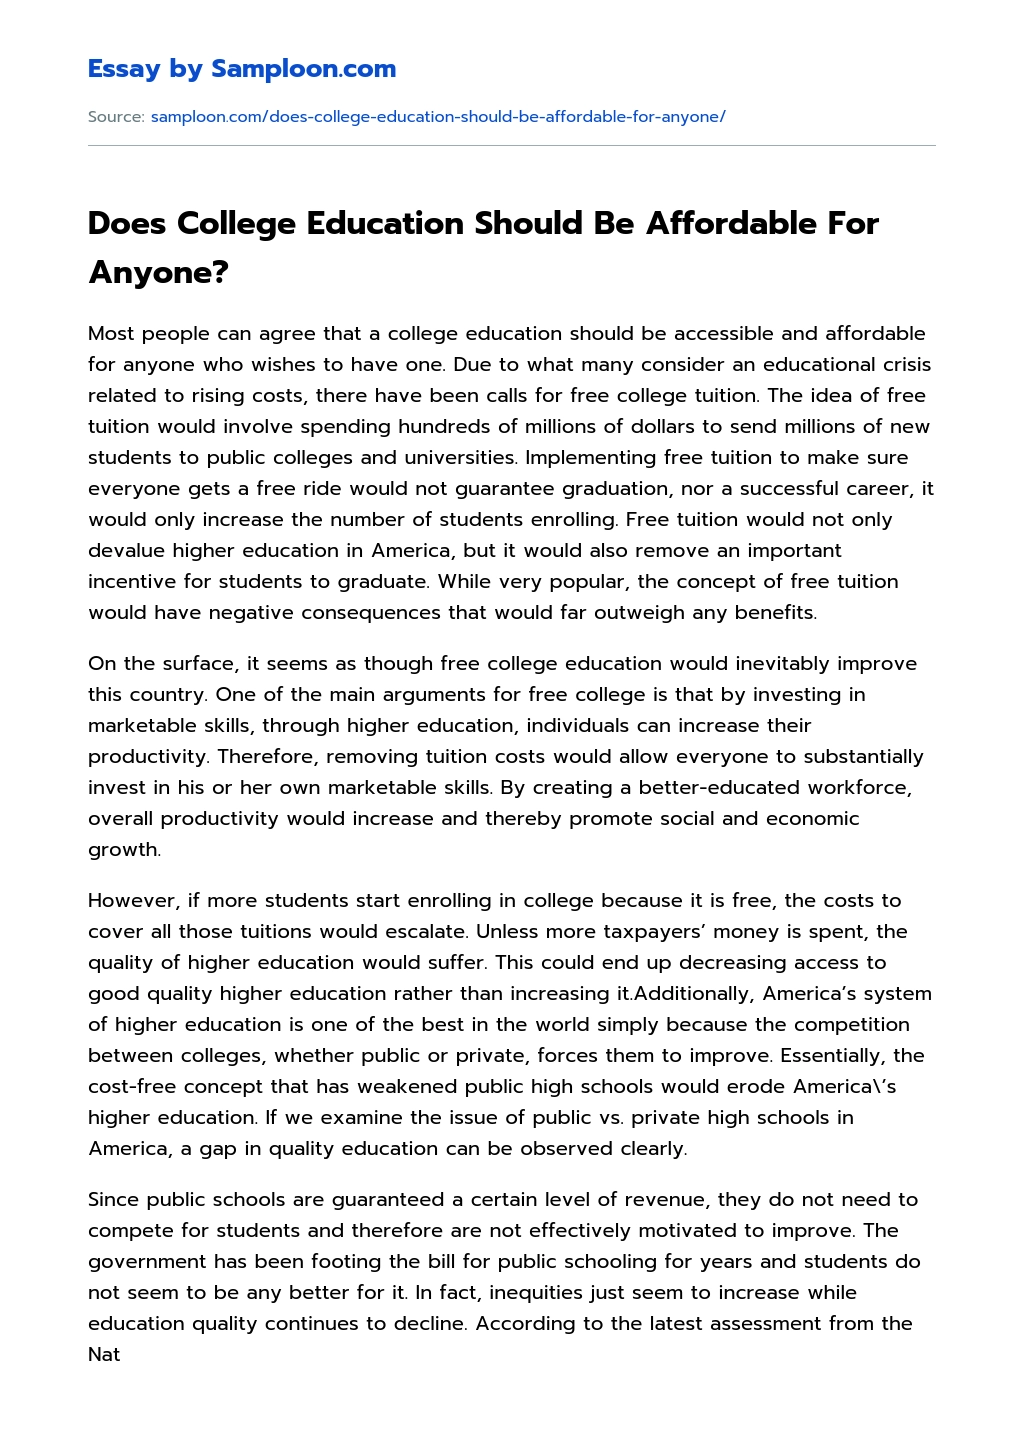 Does College Education Should Be Affordable For Anyone? essay